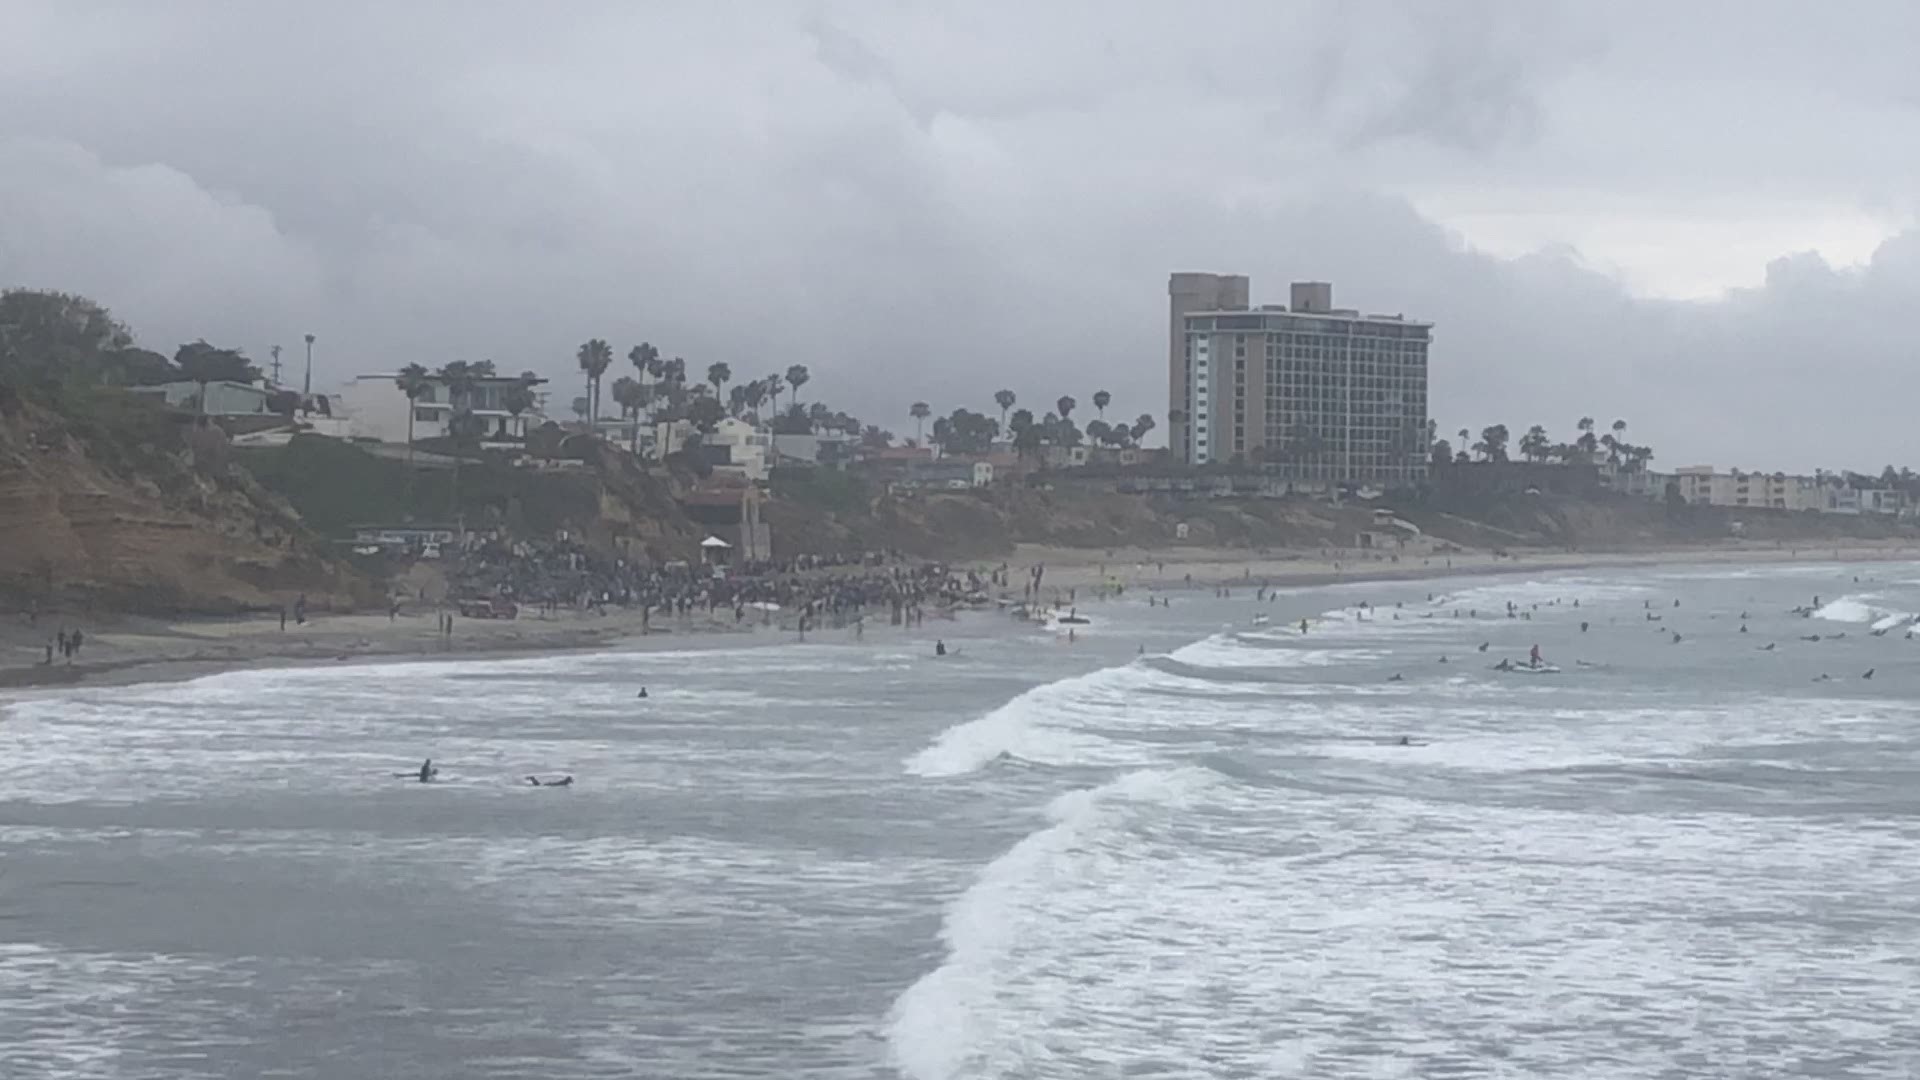 Hundreds of surfers hit the sand and water to paddle out for peace.